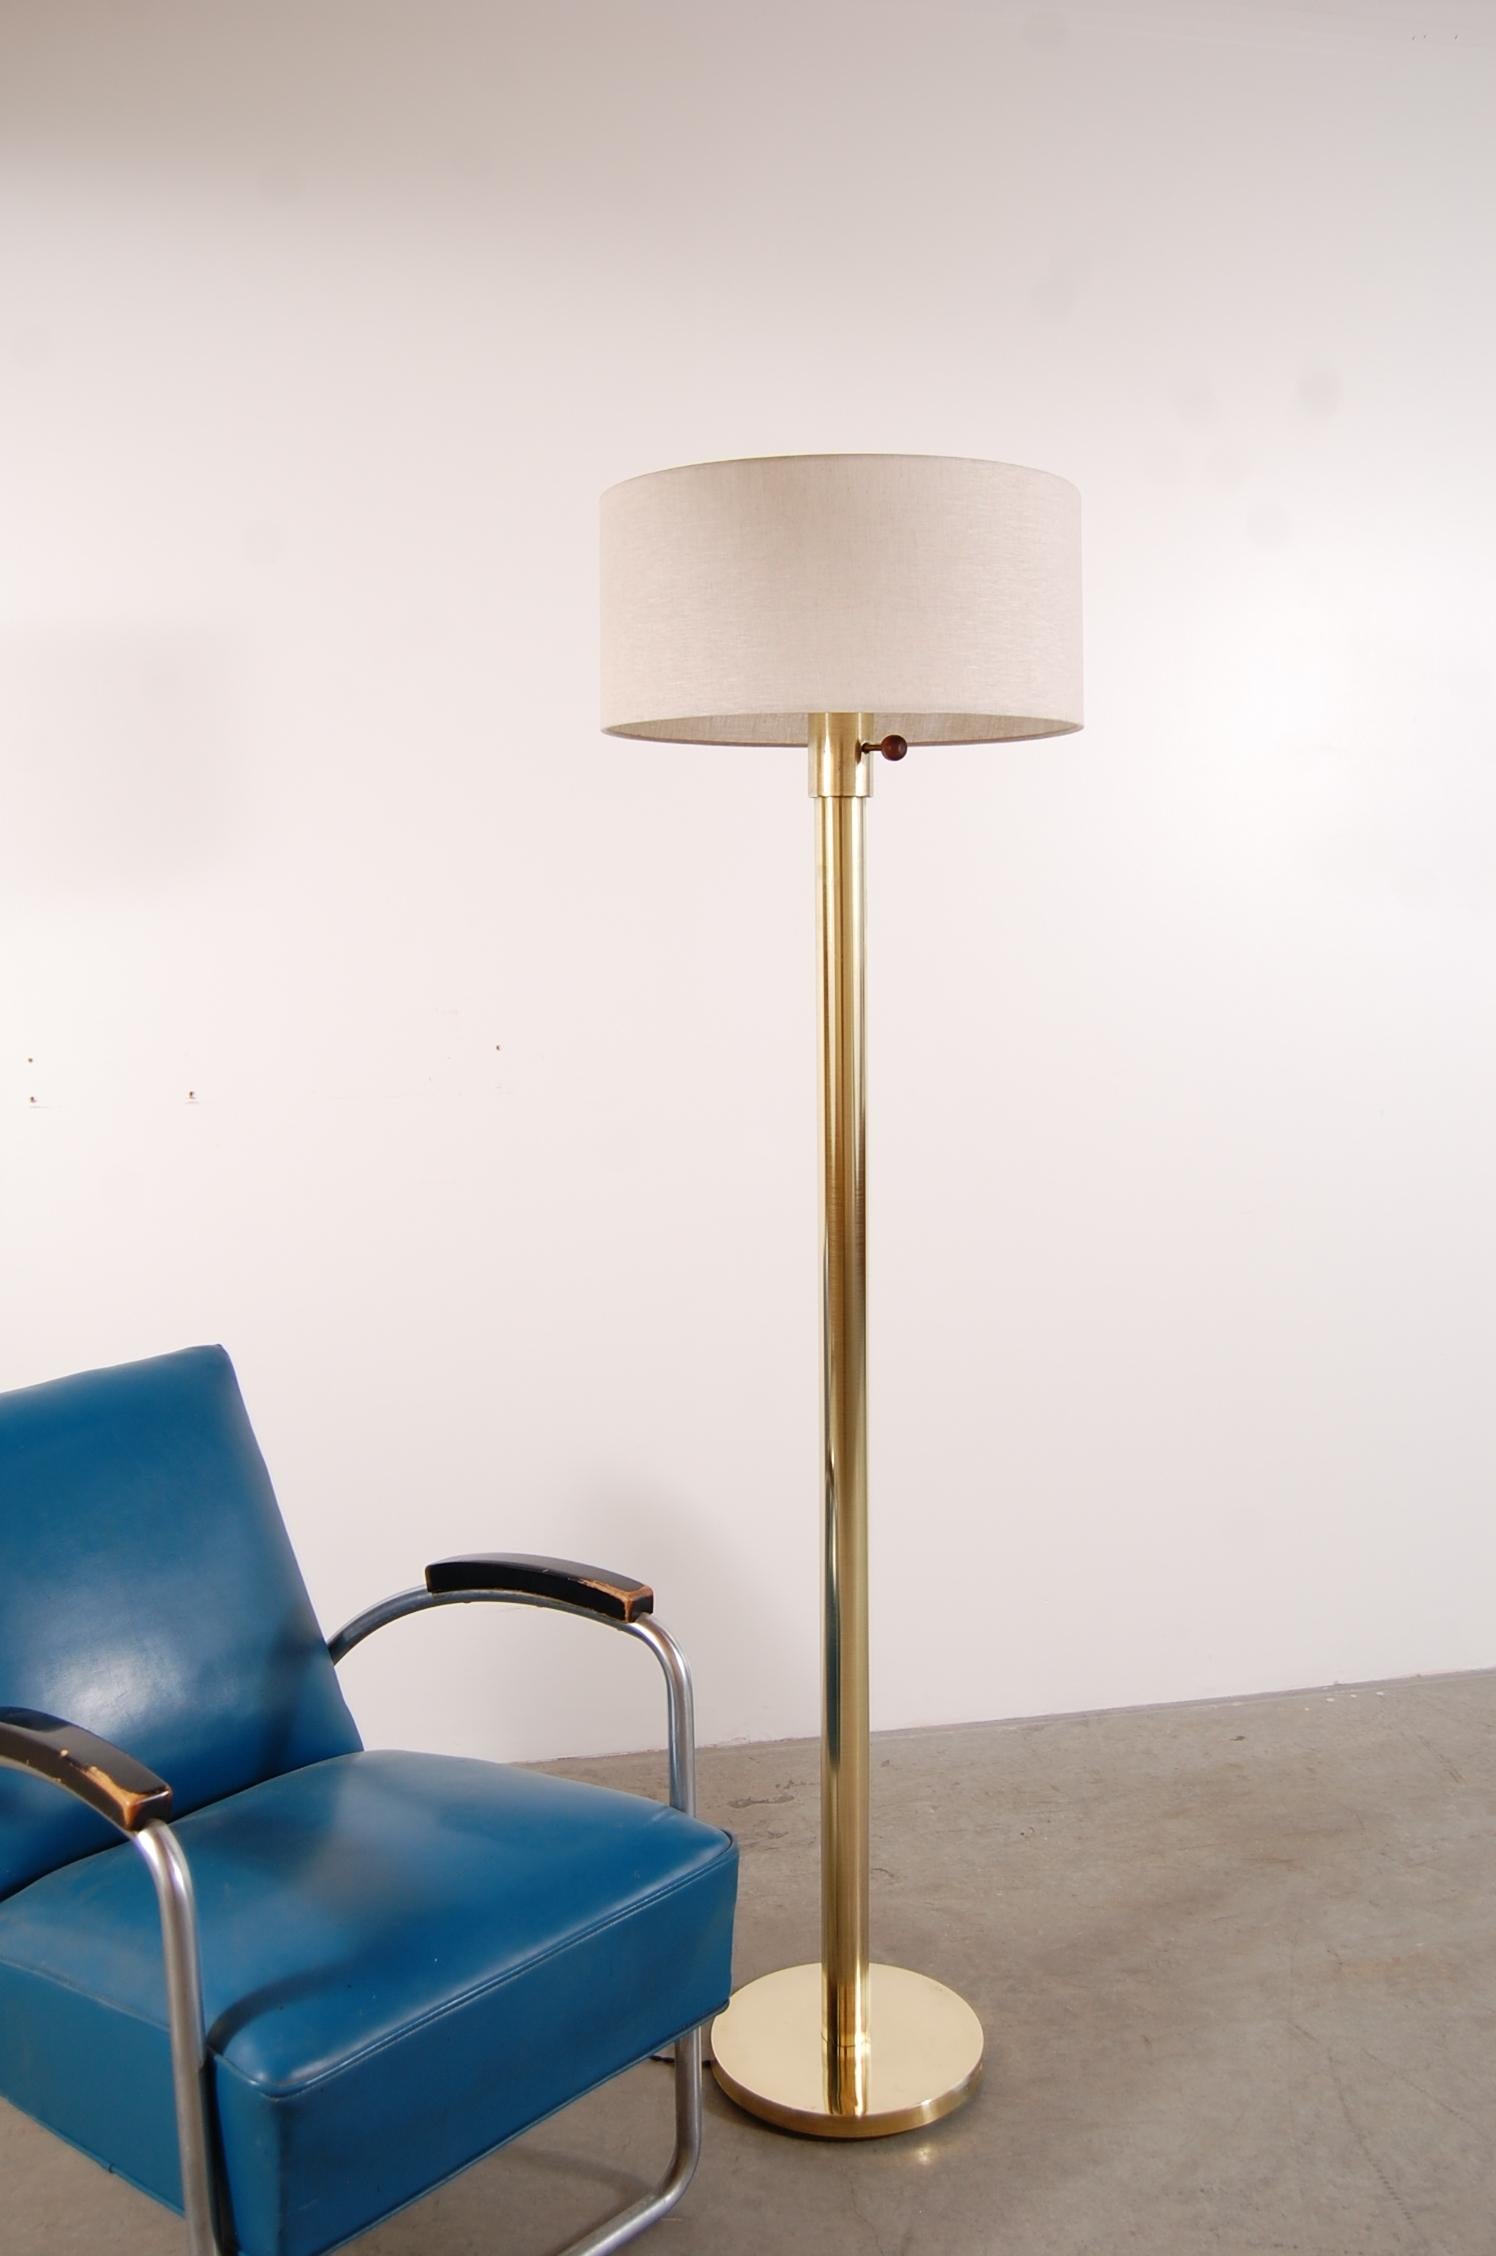 Kurt Versen floor lamp in brass, circa 1938. Lamp has been completely rewired for safety, new cloth wrapped twist cord added, and 3-way switch re-built. New linen shade. Lamp measures 63 1/2